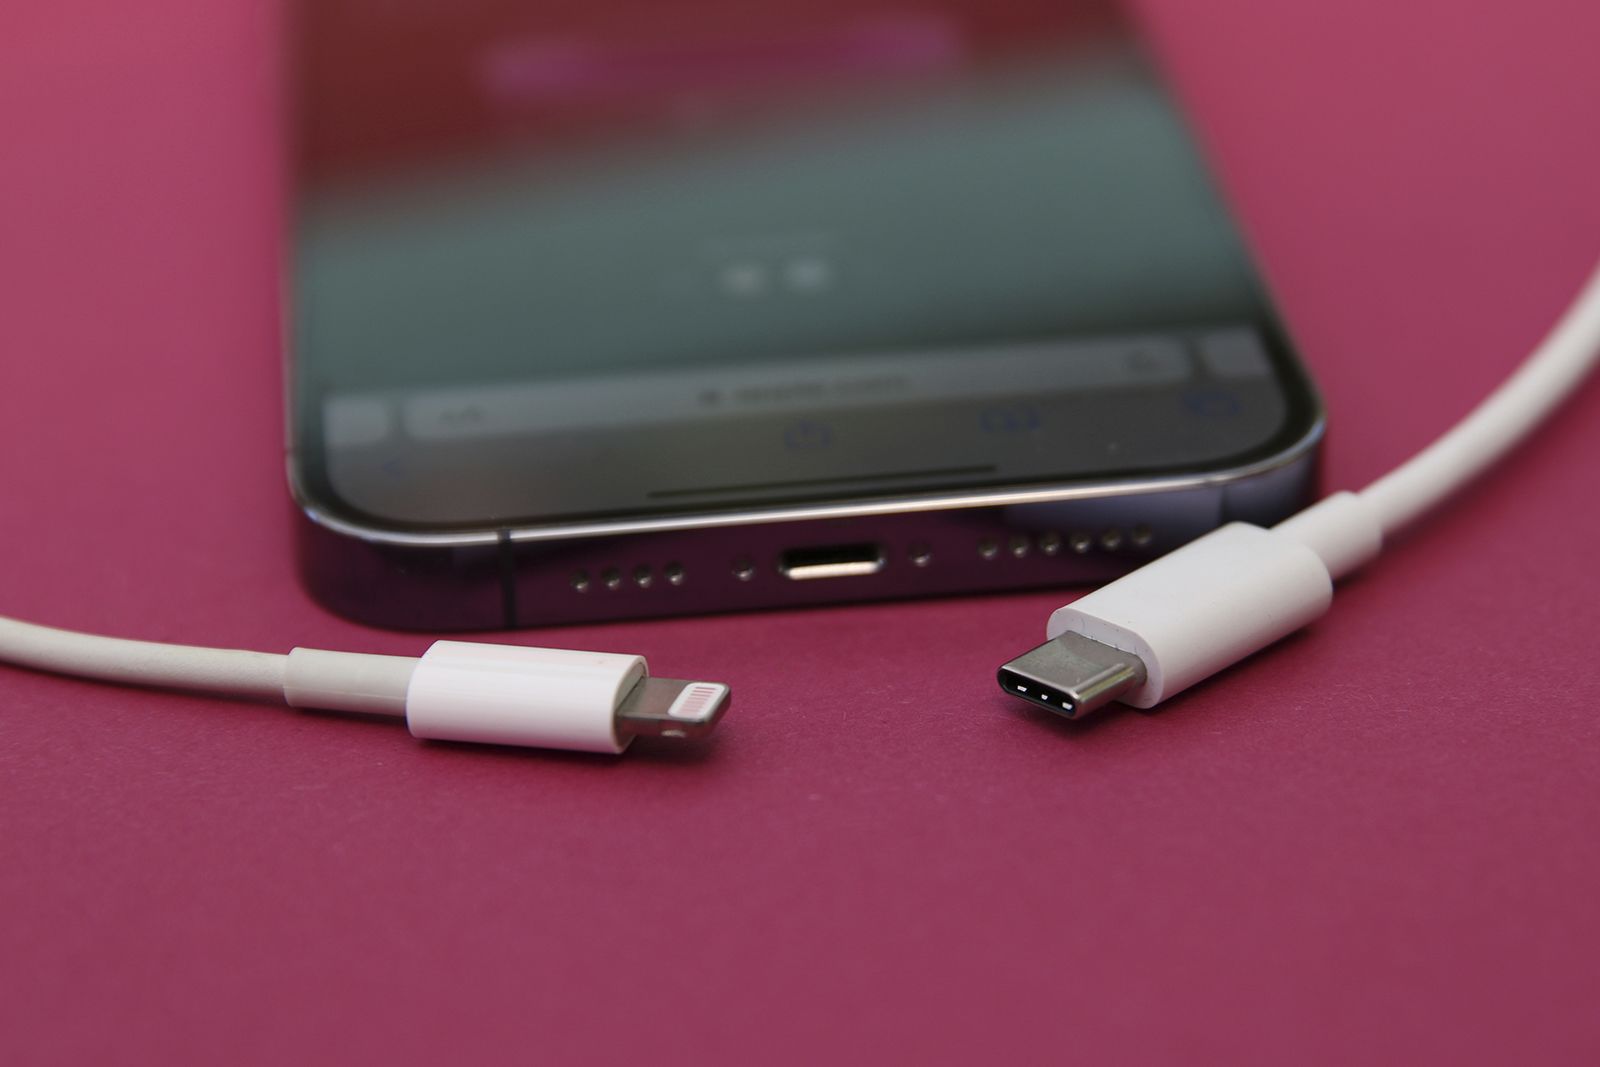 After the unveiling of the iPhone 15, Apple started selling the  USB-C-Lightning adapter for $29